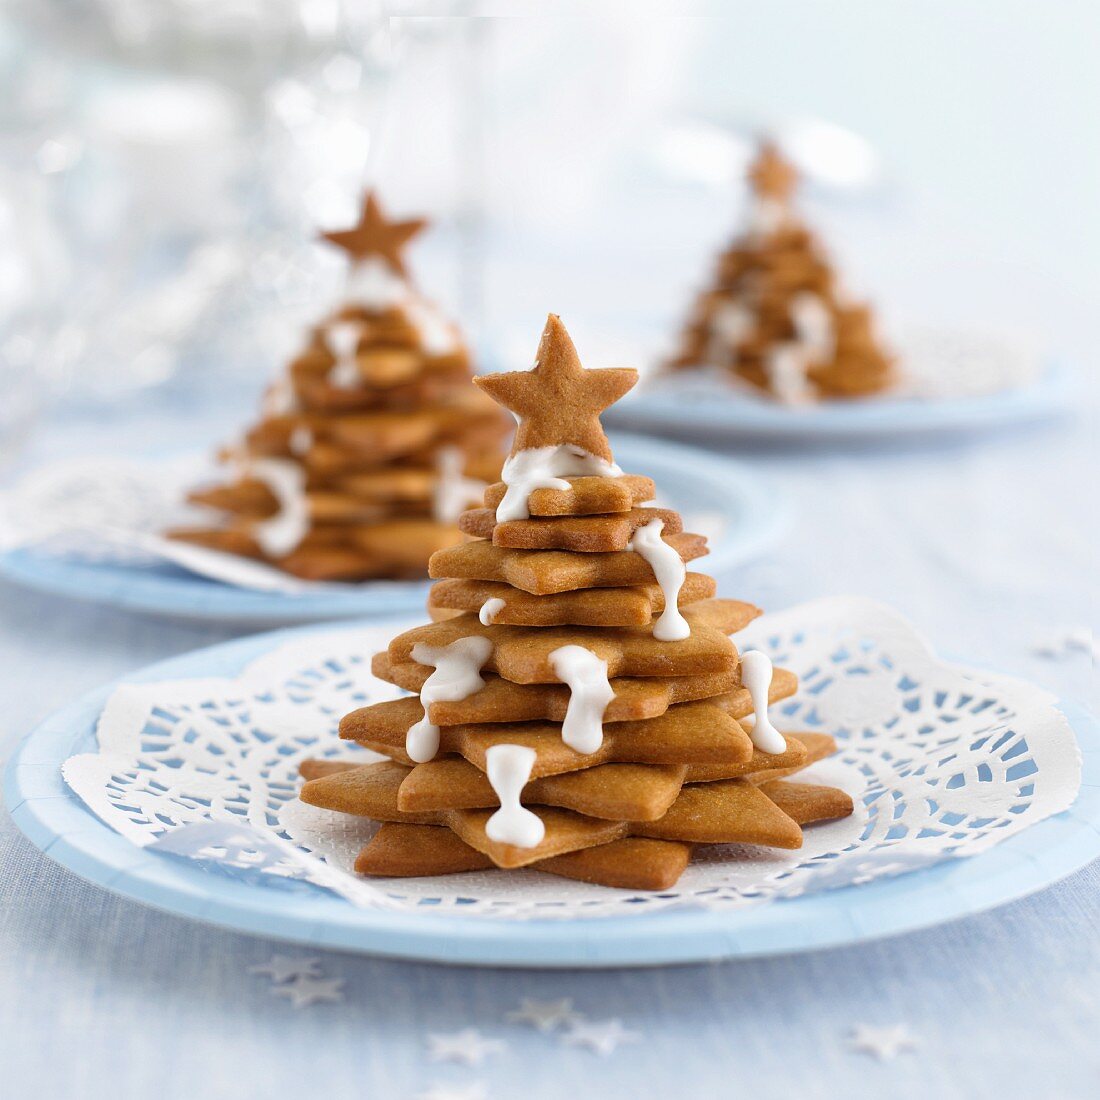 Biscuits stacked into Christmas trees decorated with icing sugar